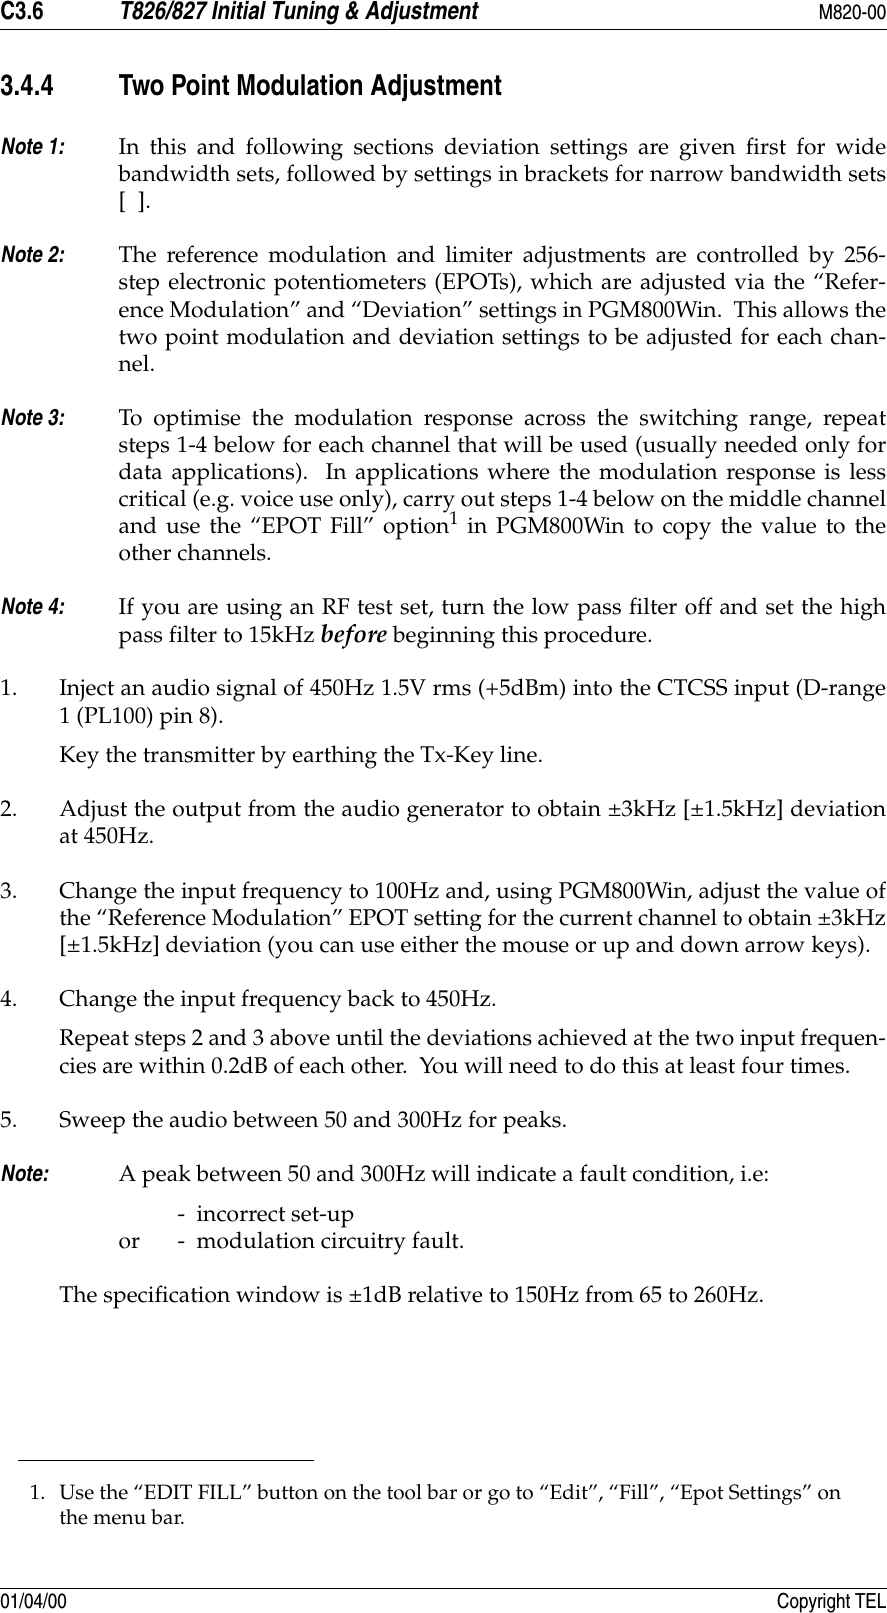 C3.6 T826/827 Initial Tuning &amp; Adjustment M820-0001/04/00 Copyright TEL3.4.4 Two Point Modulation AdjustmentNote 1: In this and following sections deviation settings are given first for widebandwidth sets, followed by settings in brackets for narrow bandwidth sets[  ].Note 2: The reference modulation and limiter adjustments are controlled by 256-step electronic potentiometers (EPOTs), which are adjusted via the “Refer-ence Modulation” and “Deviation” settings in PGM800Win.  This allows thetwo point modulation and deviation settings to be adjusted for each chan-nel.Note 3: To optimise the modulation response across the switching range, repeatsteps 1-4 below for each channel that will be used (usually needed only fordata applications).  In applications where the modulation response is lesscritical (e.g. voice use only), carry out steps 1-4 below on the middle channeland use the “EPOT Fill” option1 in PGM800Win to copy the value to theother channels.Note 4: If you are using an RF test set, turn the low pass filter off and set the highpass filter to 15kHz before beginning this procedure.1. Inject an audio signal of 450Hz 1.5V rms (+5dBm) into the CTCSS input (D-range1 (PL100) pin 8). Key the transmitter by earthing the Tx-Key line.2. Adjust the output from the audio generator to obtain ±3kHz [±1.5kHz] deviationat 450Hz.3. Change the input frequency to 100Hz and, using PGM800Win, adjust the value ofthe “Reference Modulation” EPOT setting for the current channel to obtain ±3kHz[±1.5kHz] deviation (you can use either the mouse or up and down arrow keys).4. Change the input frequency back to 450Hz.Repeat steps 2 and 3 above until the deviations achieved at the two input frequen-cies are within 0.2dB of each other.  You will need to do this at least four times.5. Sweep the audio between 50 and 300Hz for peaks.Note: A peak between 50 and 300Hz will indicate a fault condition, i.e:-  incorrect set-up or -  modulation circuitry fault. The specification window is ±1dB relative to 150Hz from 65 to 260Hz.1. Use the “EDIT FILL” button on the tool bar or go to “Edit”, “Fill”, “Epot Settings” on the menu bar.